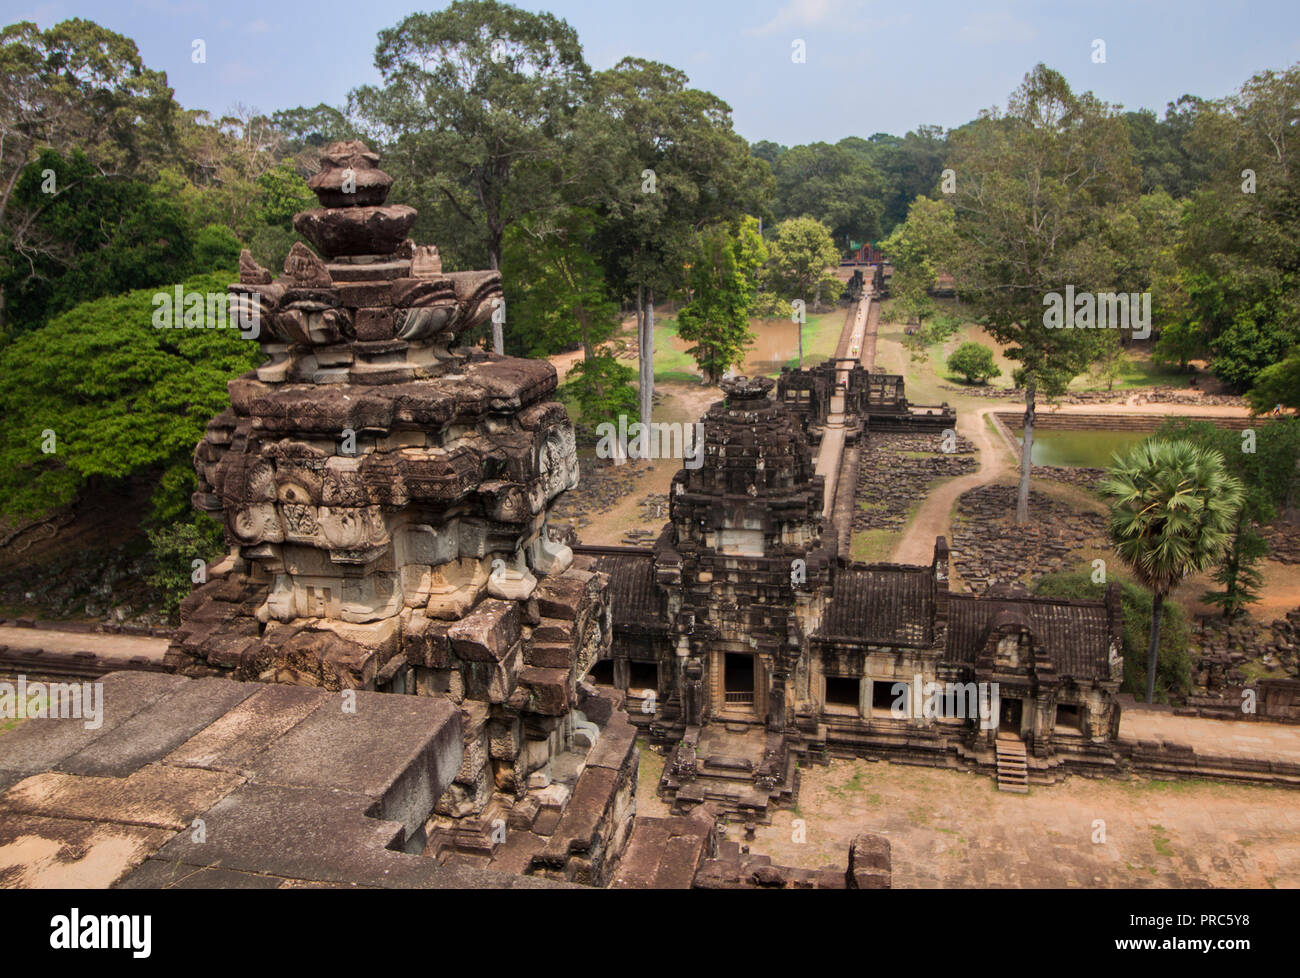 Tower and entrance of the ancient Angkor Thom Baphuon Temple in Angkor Area, near Siem Reap, Cambodia, Asia. Buddhist monastery from the 12th century. Stock Photo